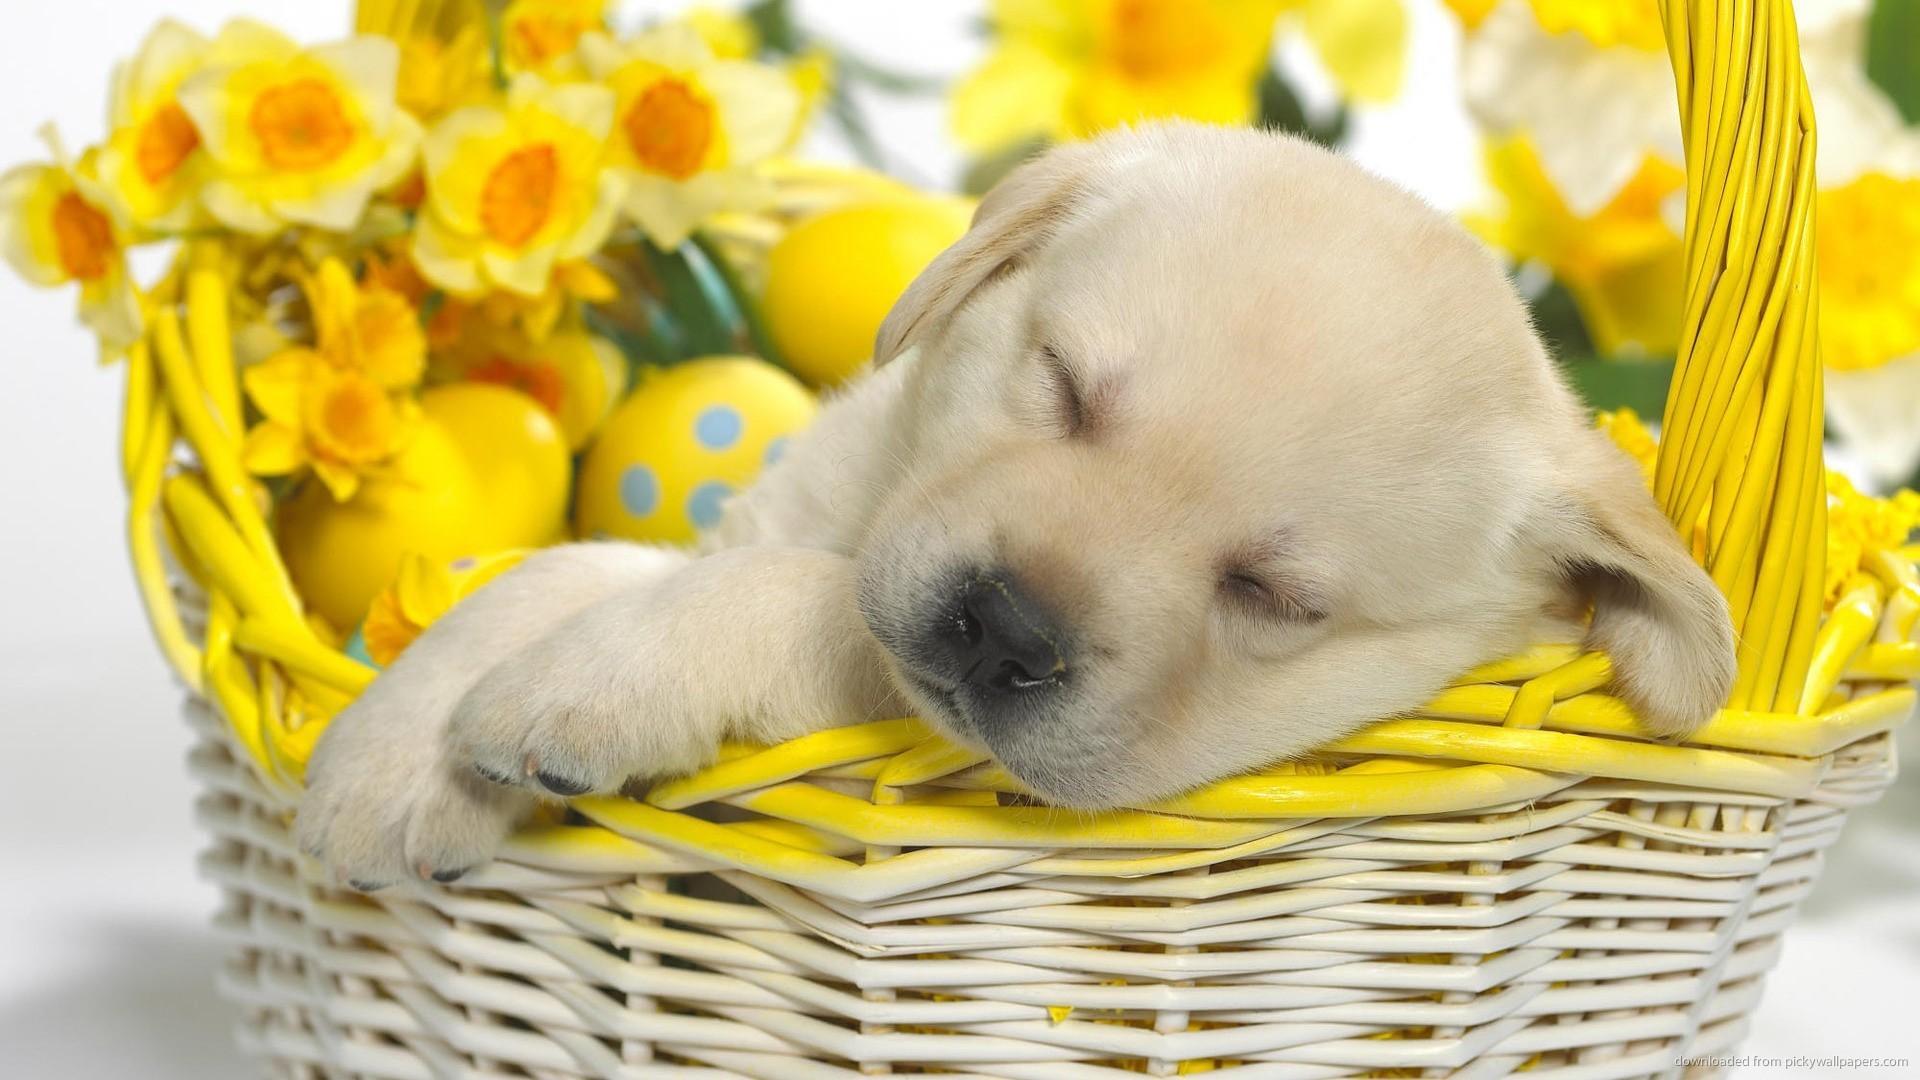 Cute Puppy Sleeping In An Easter Basket Wallpaper For Blackberry Curve